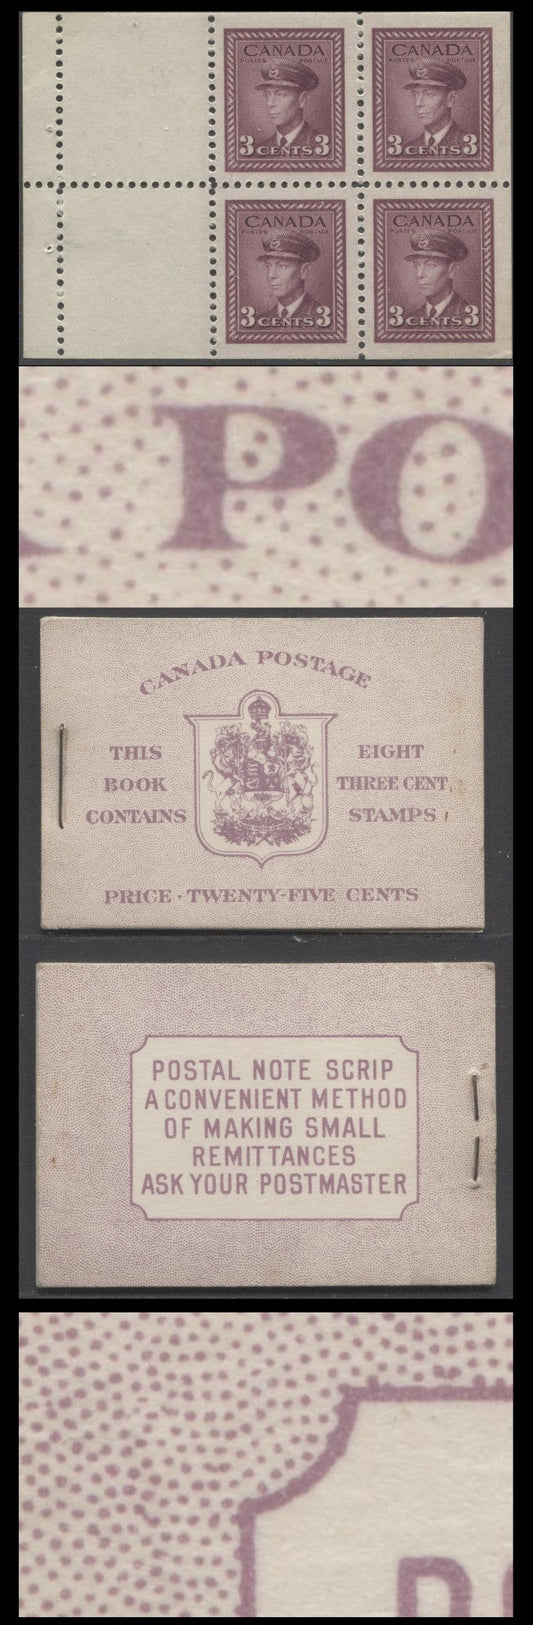 Lot 89 Canada #BK35dE 1942-1947 War Issue, A Complete 25c English Booklet, 2 Panes Of 4+2 Labels 3c Rose Violet, Front Cover IIe, Back Cover Cai, Type II, 7c & 5c Rates Page, 1,201,000 Issued